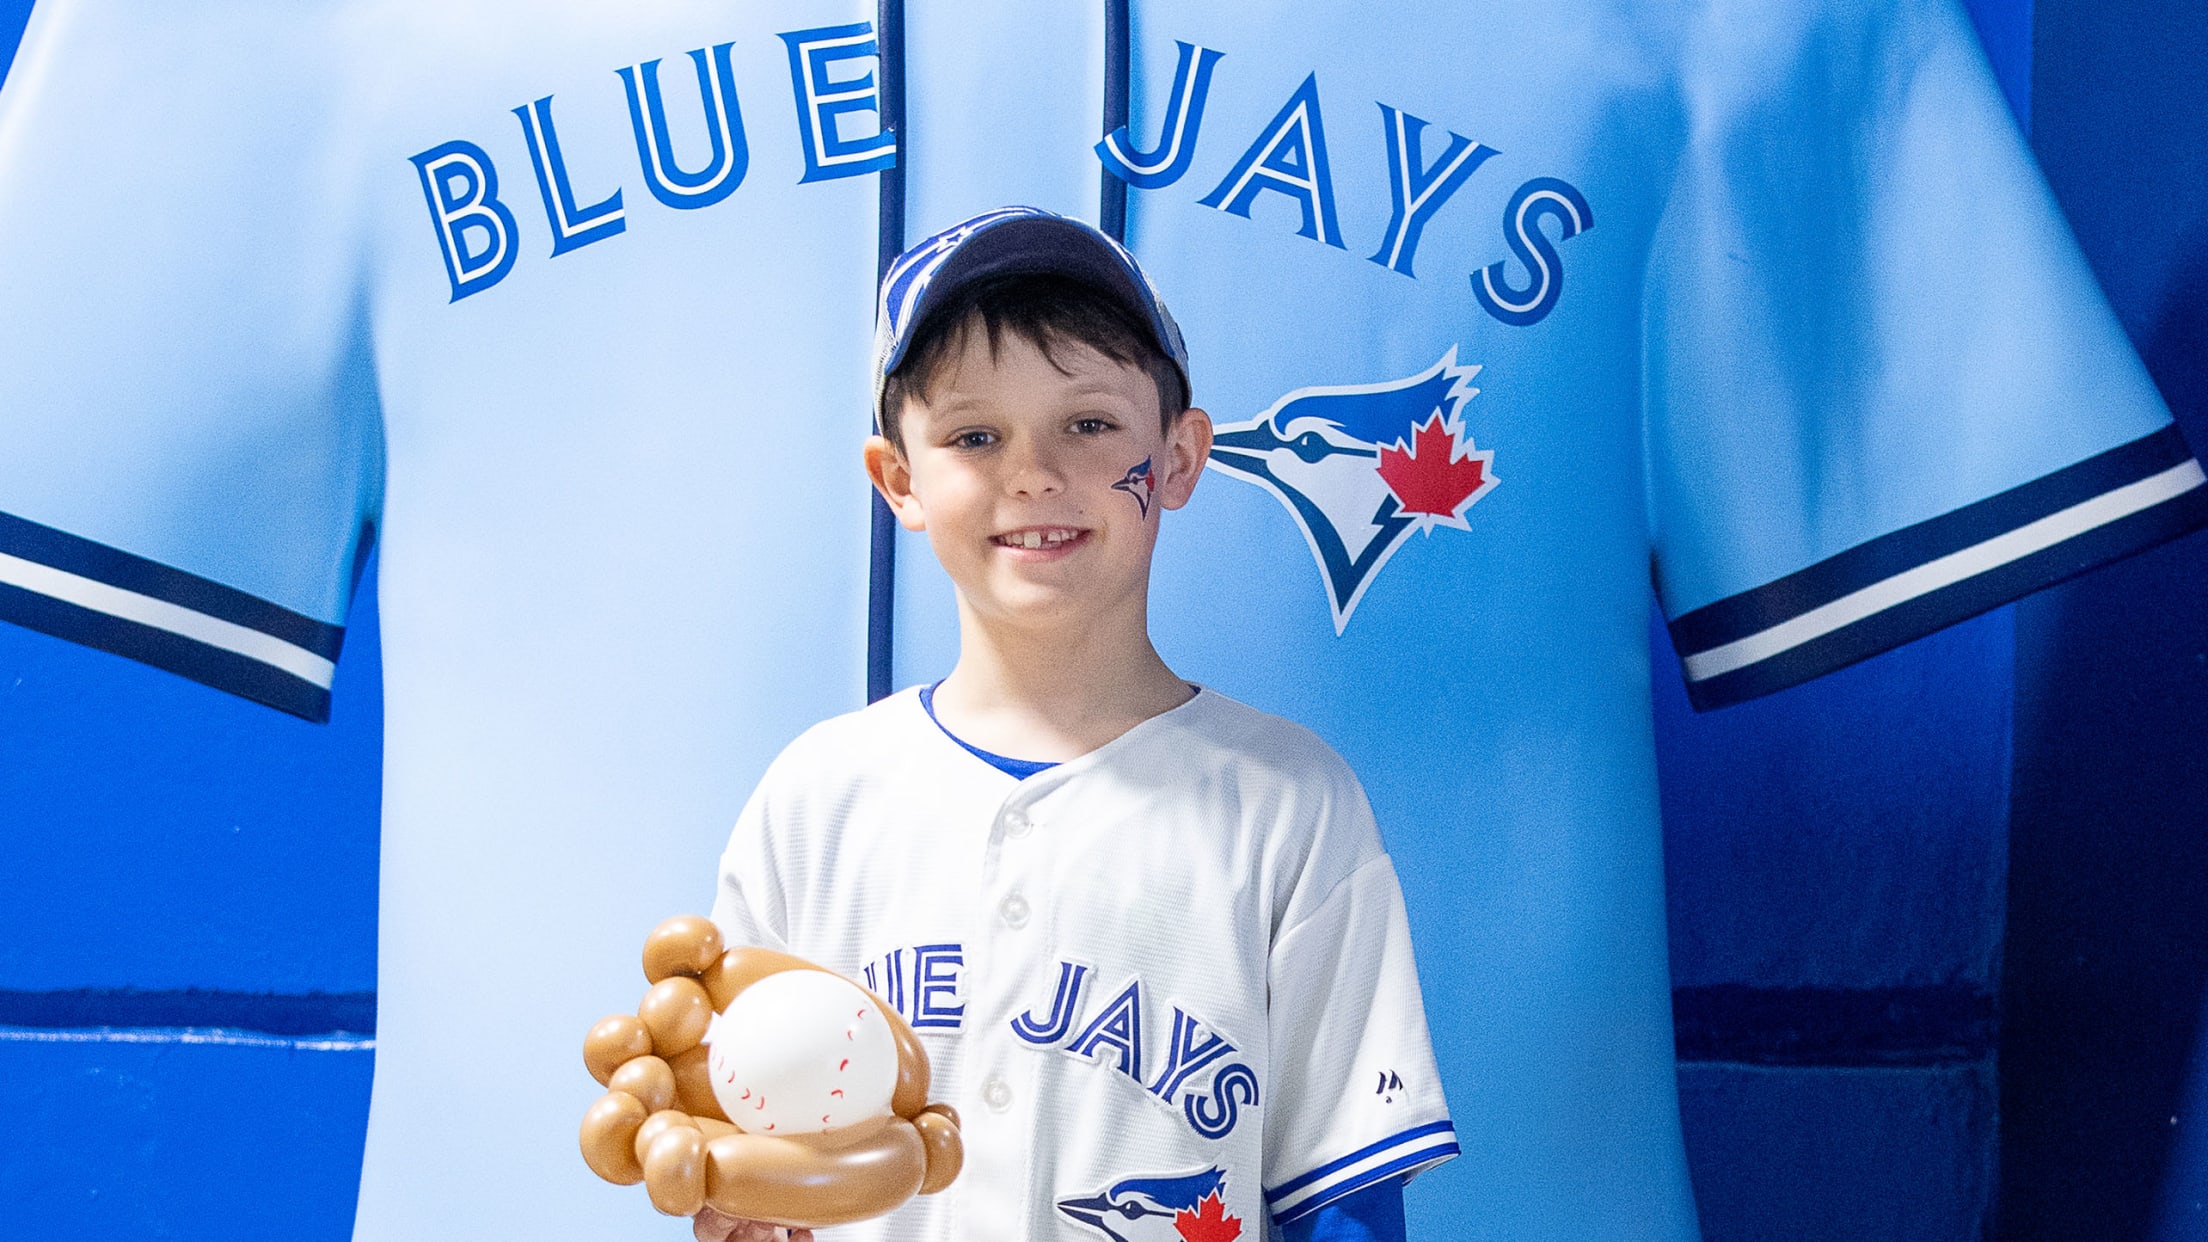 New-look Blue Jays 'built to win